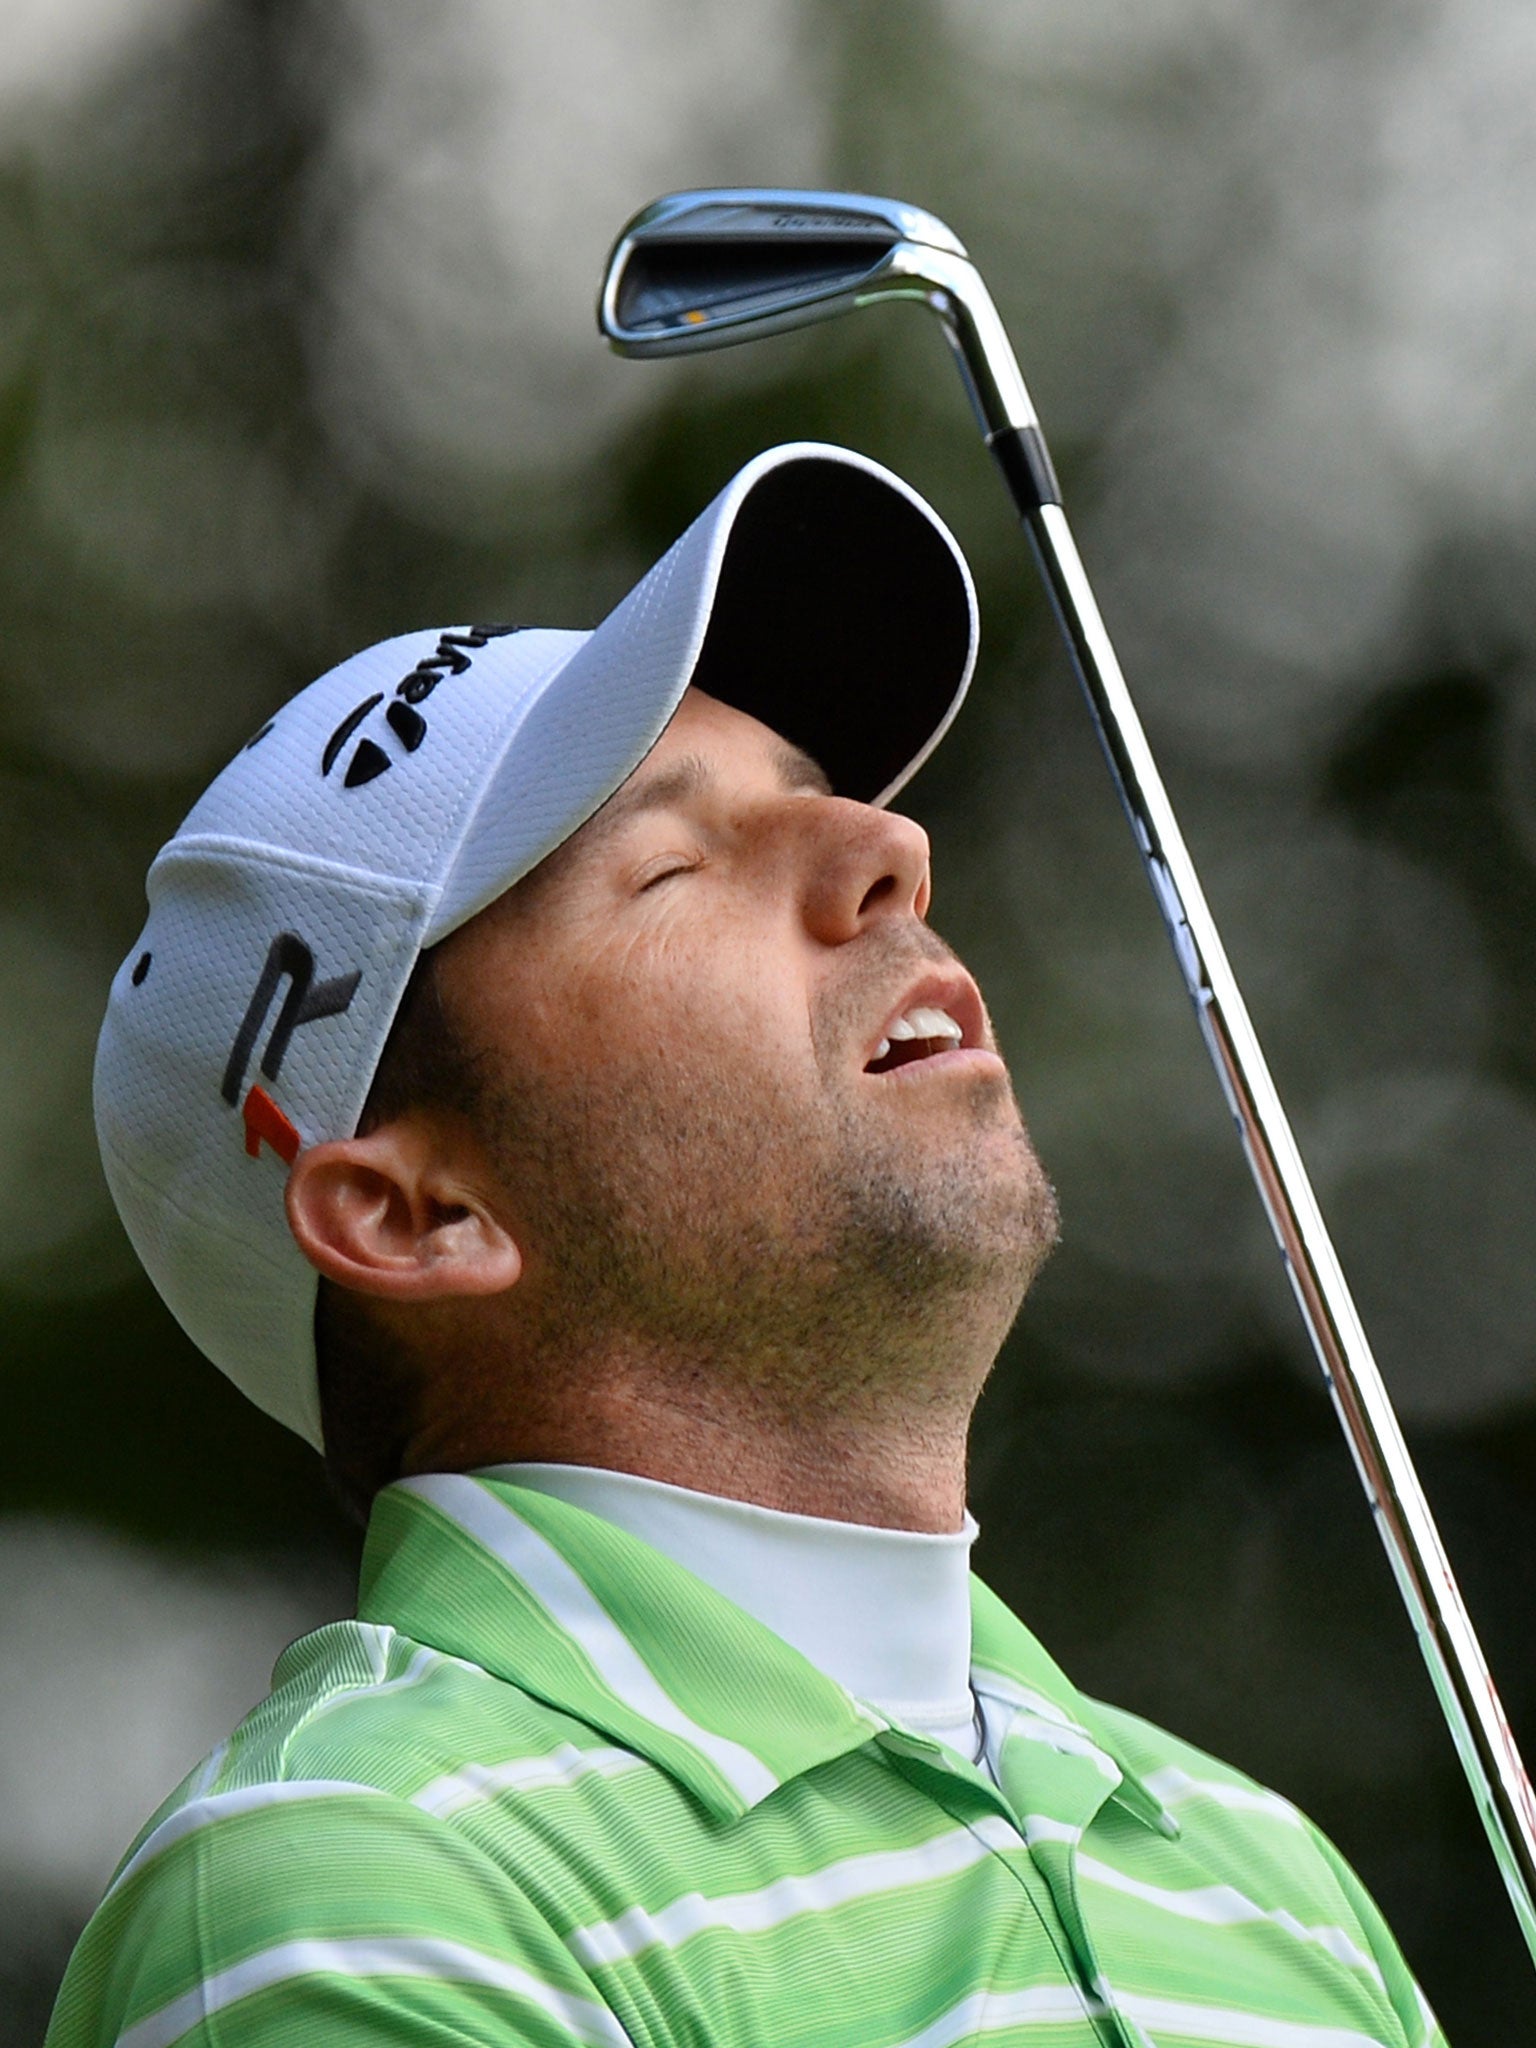 Sergio Garcia's comments could be used as a catalyst for change